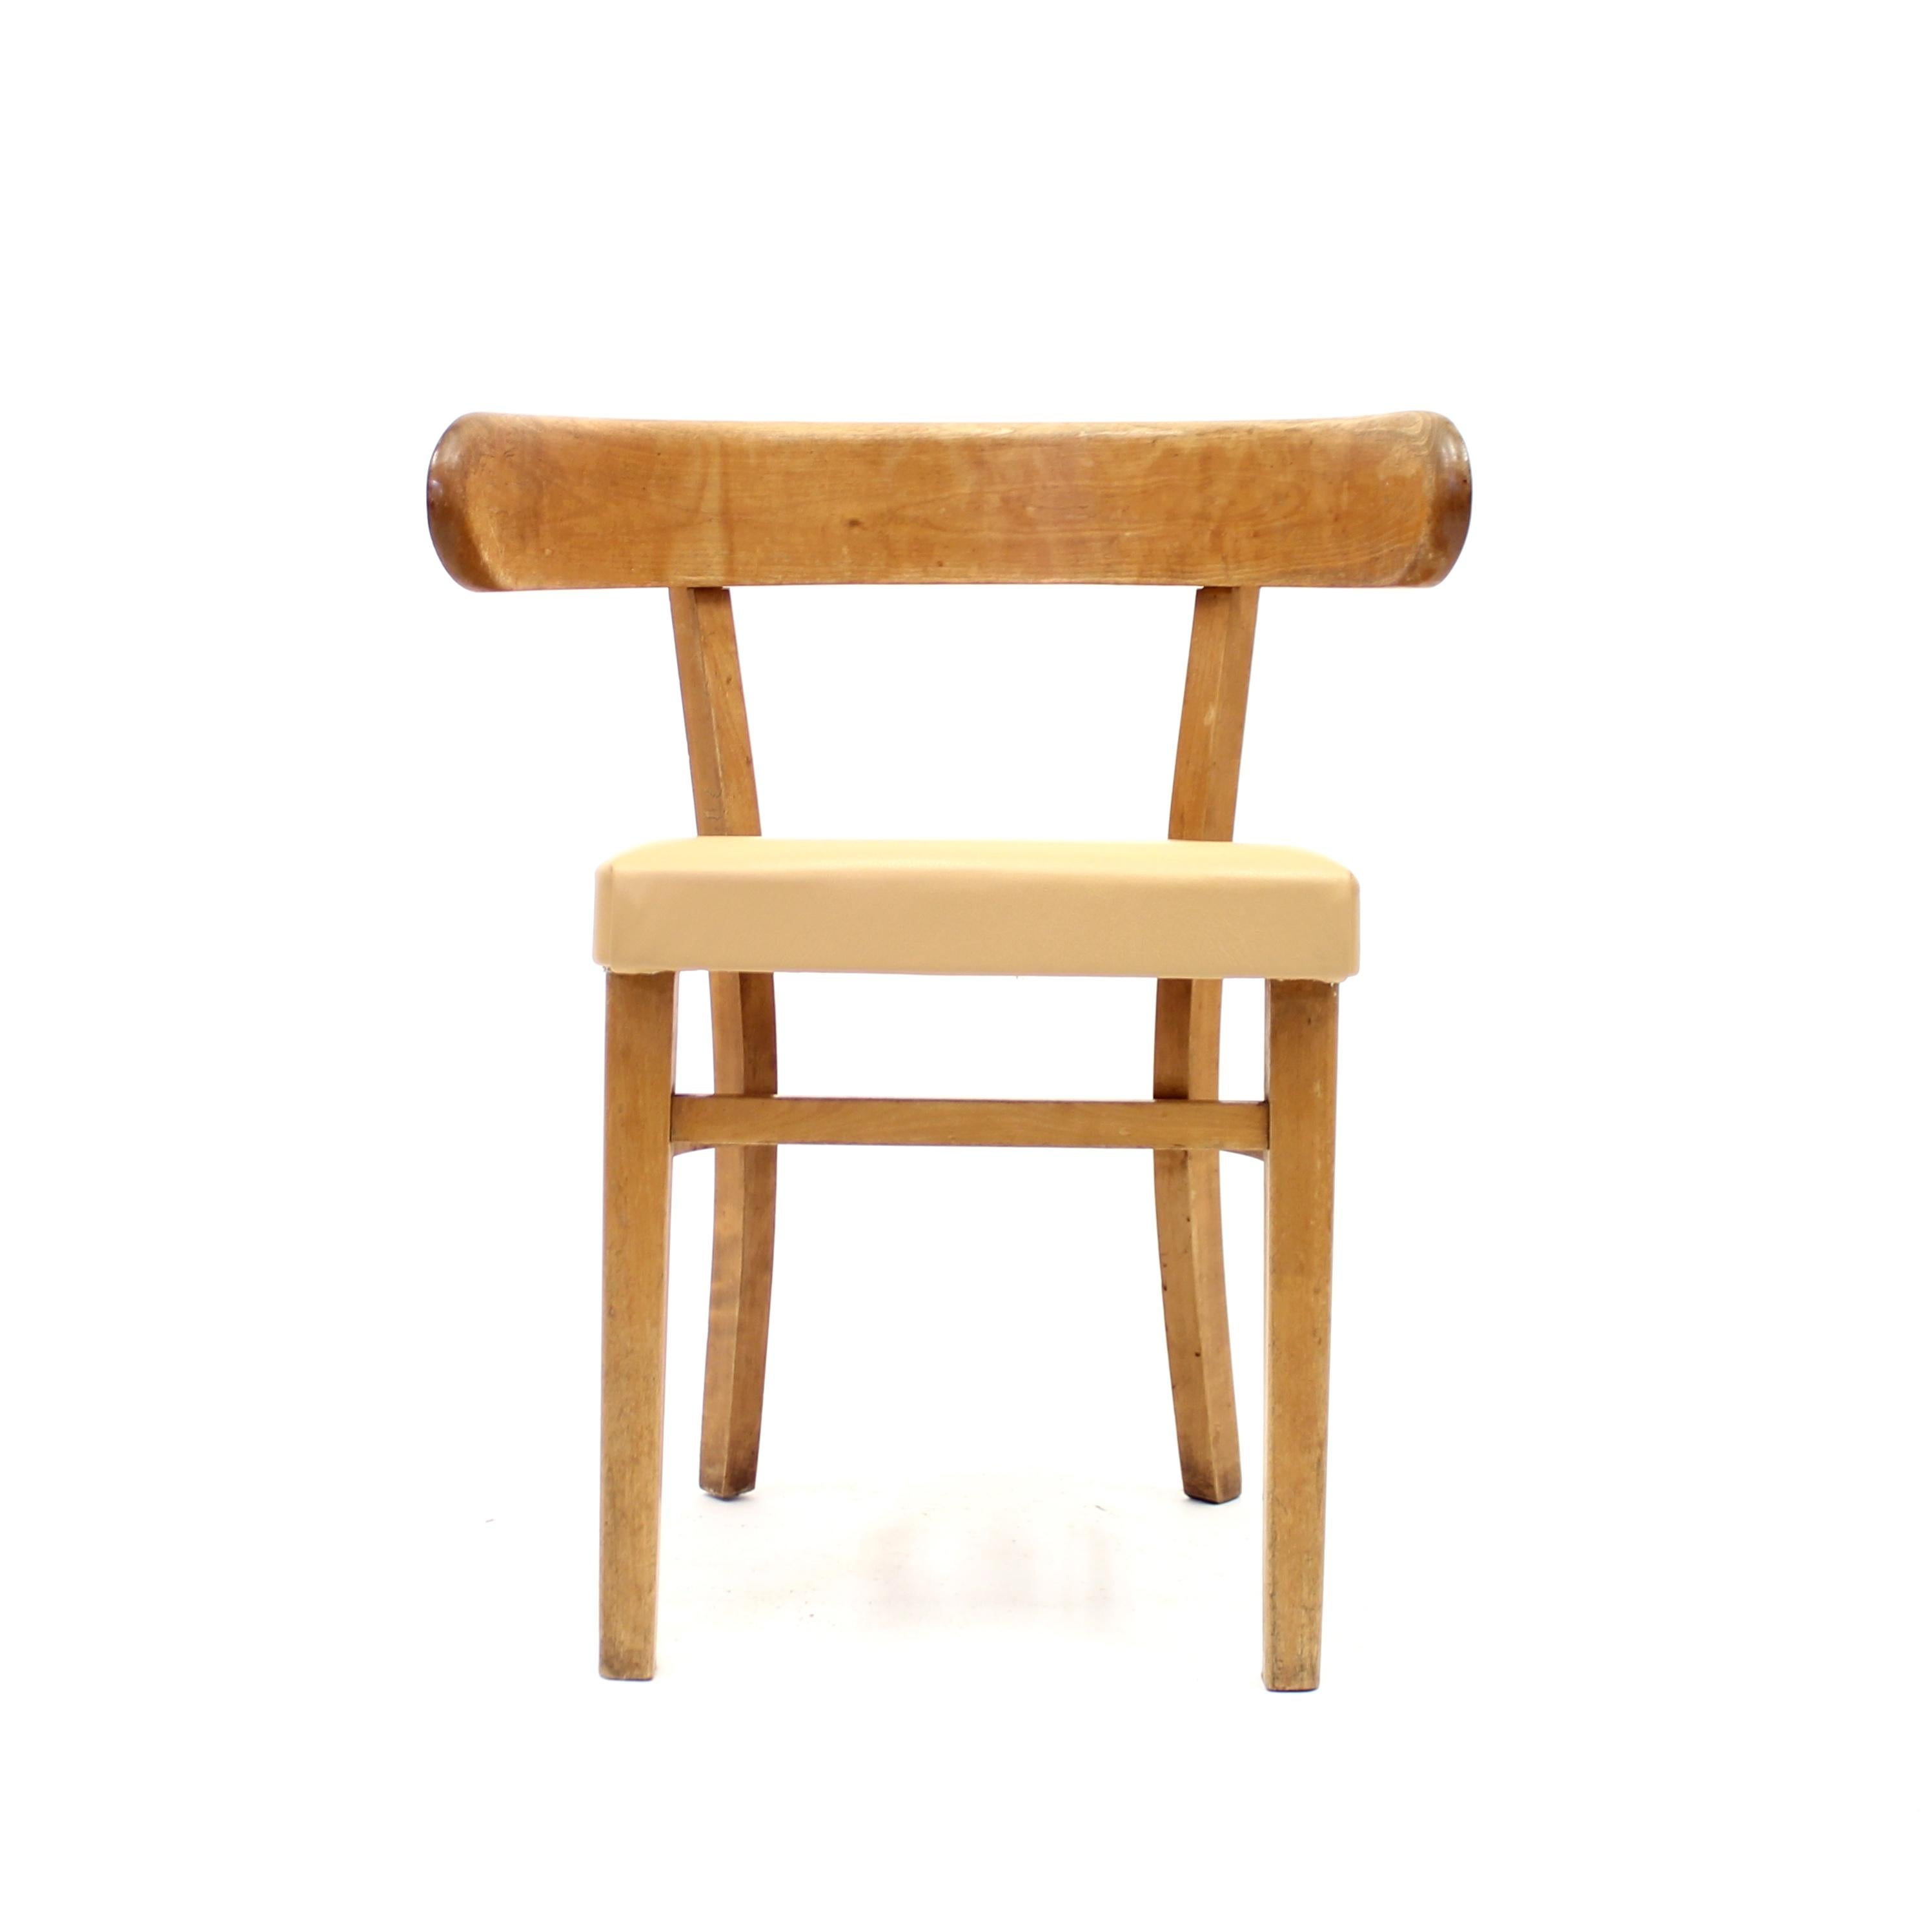 A so called hugging chair designed by Finish designer Werner West in the 1930s and manufactured by Wilhelm Schauman in the town Jyväskyle in the middle of Finland. The design of the back is heavily inspired by the Greek Klismos chairs. The frame is